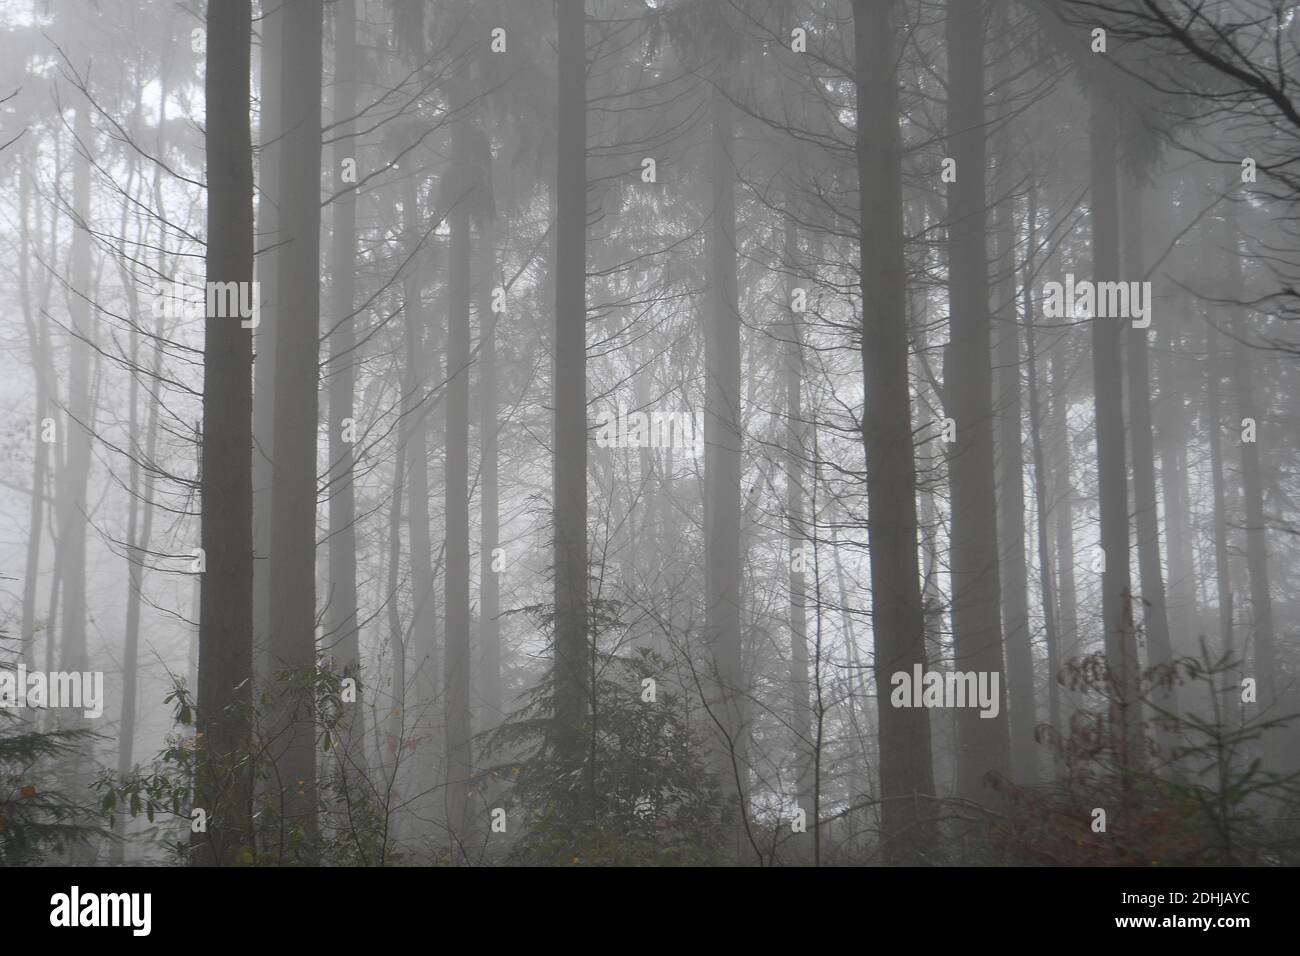 Stock images of fog in woodland - North Downs near West Horsley, Surrey.- Dick Focks Common - Forestry Commission.     Picture shows fog, trees, mist across this picturesque area of Surrey.  Picture taken 7th December 2020 Stock Photo